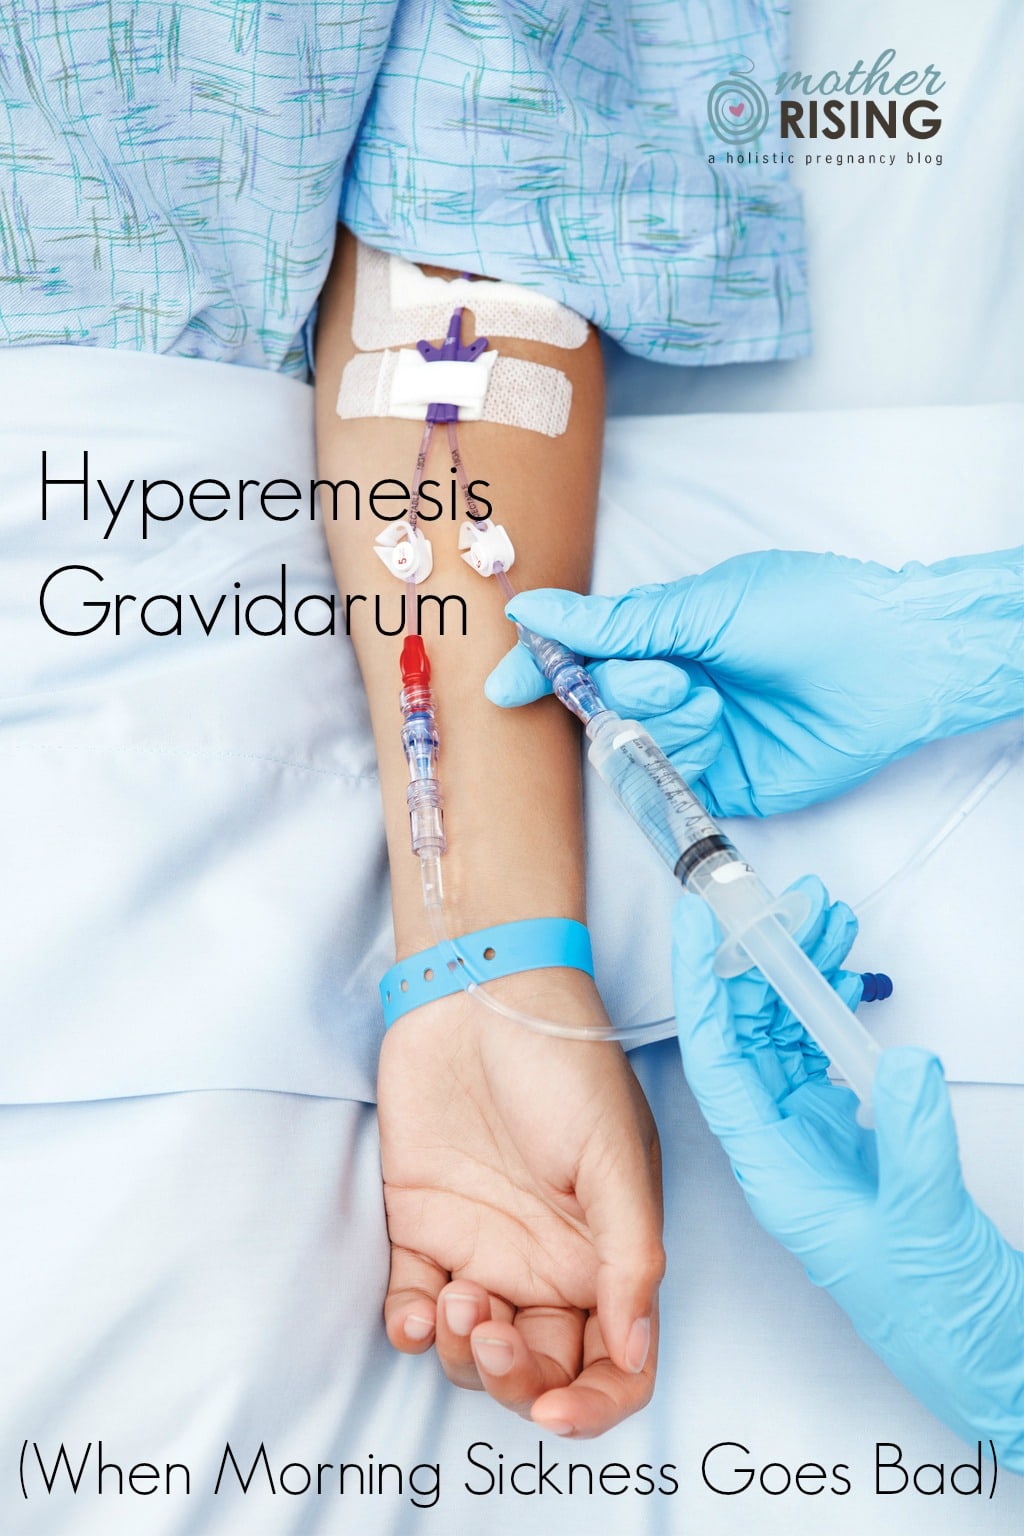 Hyperemesis gravidarum is not morning sickness. HG, as it is commonly referred to, is extreme, persistent nausea and vomiting that can lead to dehydration. If you are experiencing HG, know that what you are experiencing is real, extremely difficult, and you are not alone. 